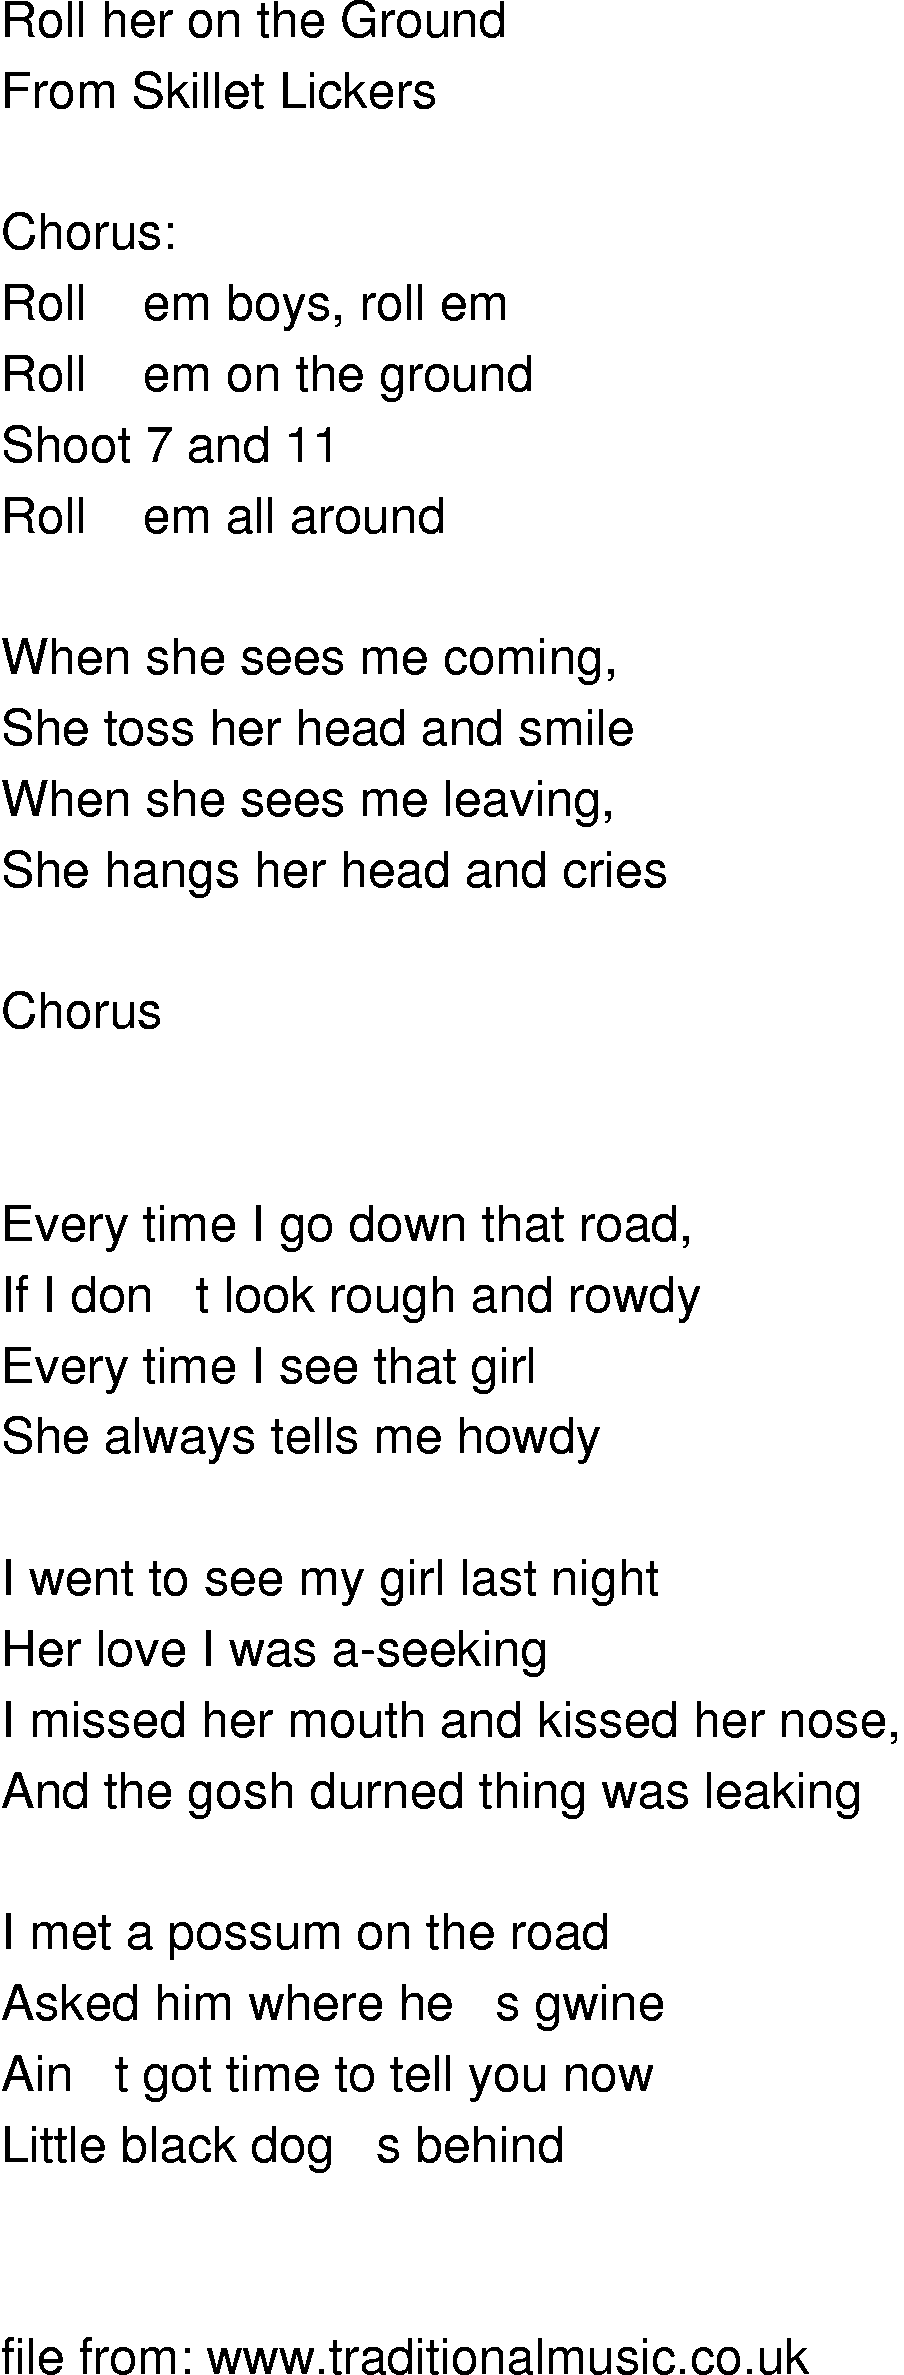 Old-Time (oldtimey) Song Lyrics - roll her on the ground